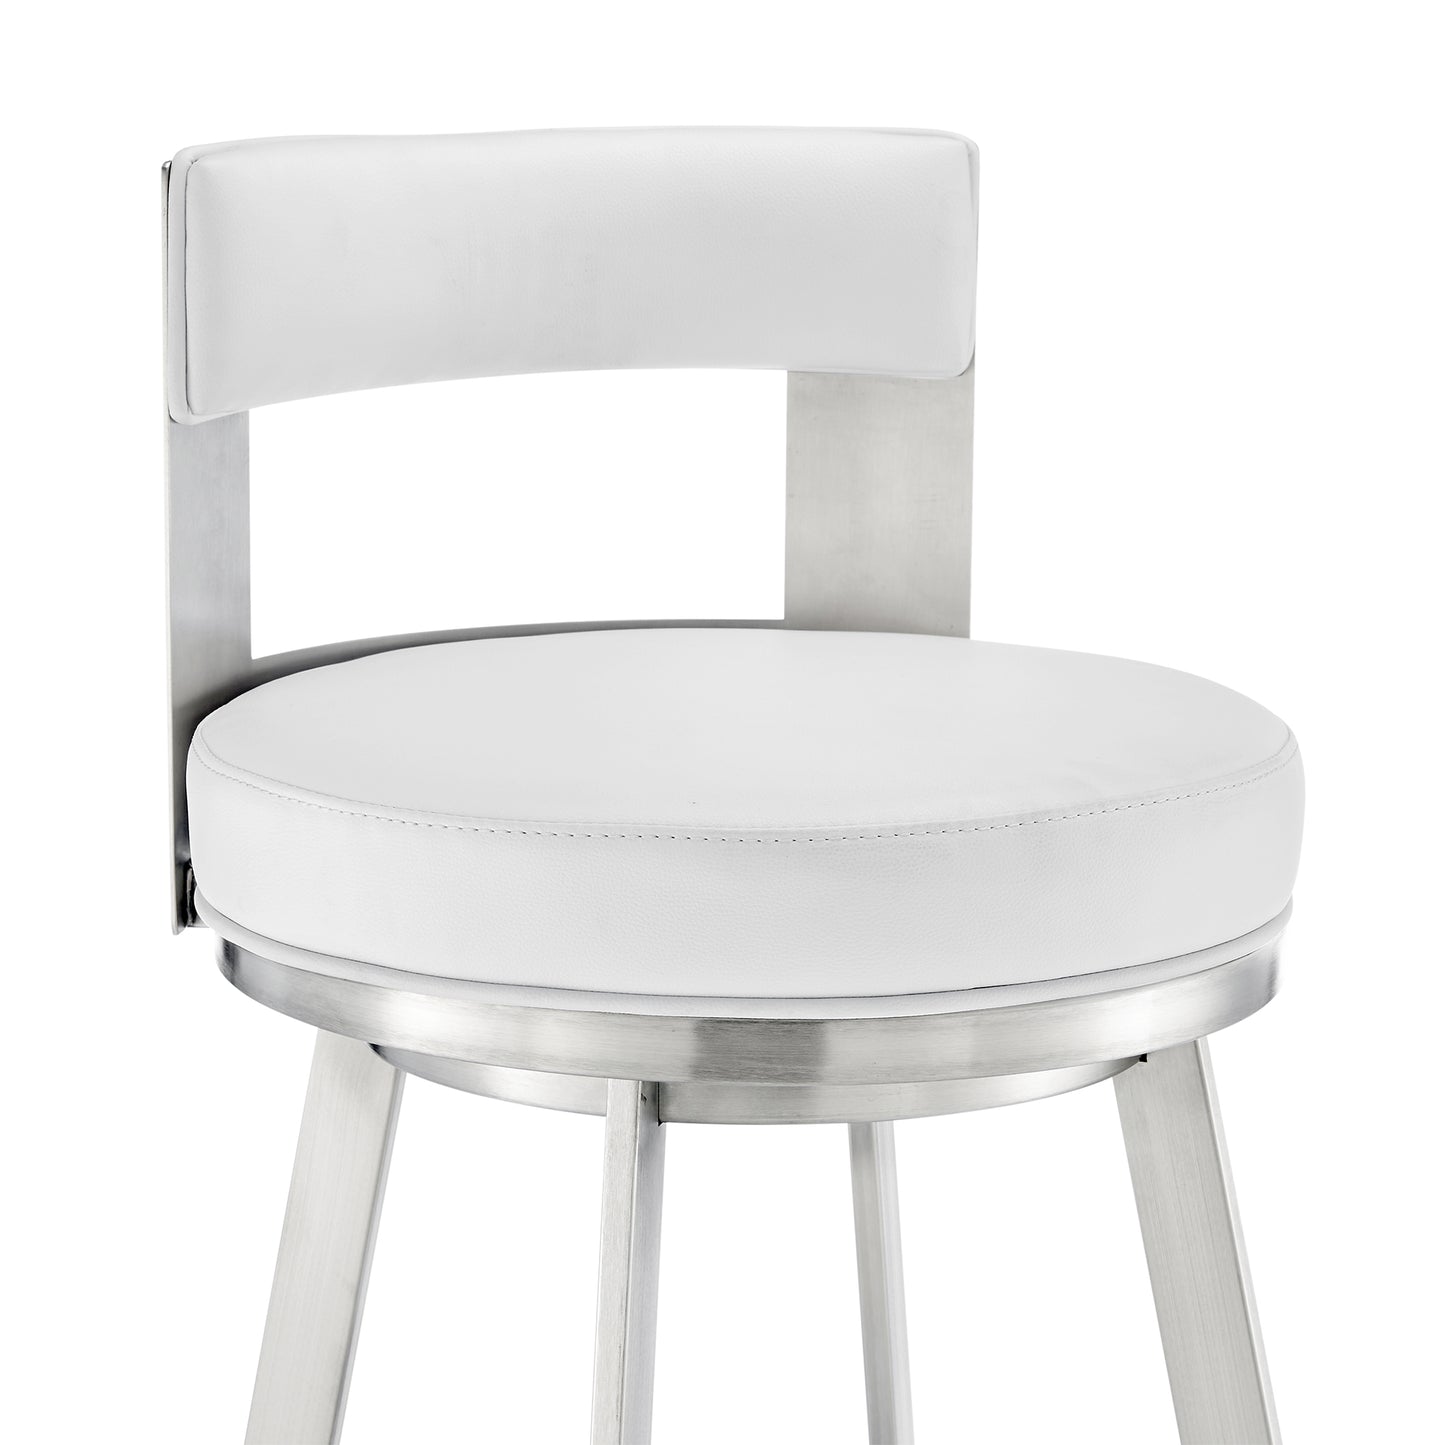 Flynn 30" Swivel Bar Stool in Brushed Stainless Steel with White Faux Leather